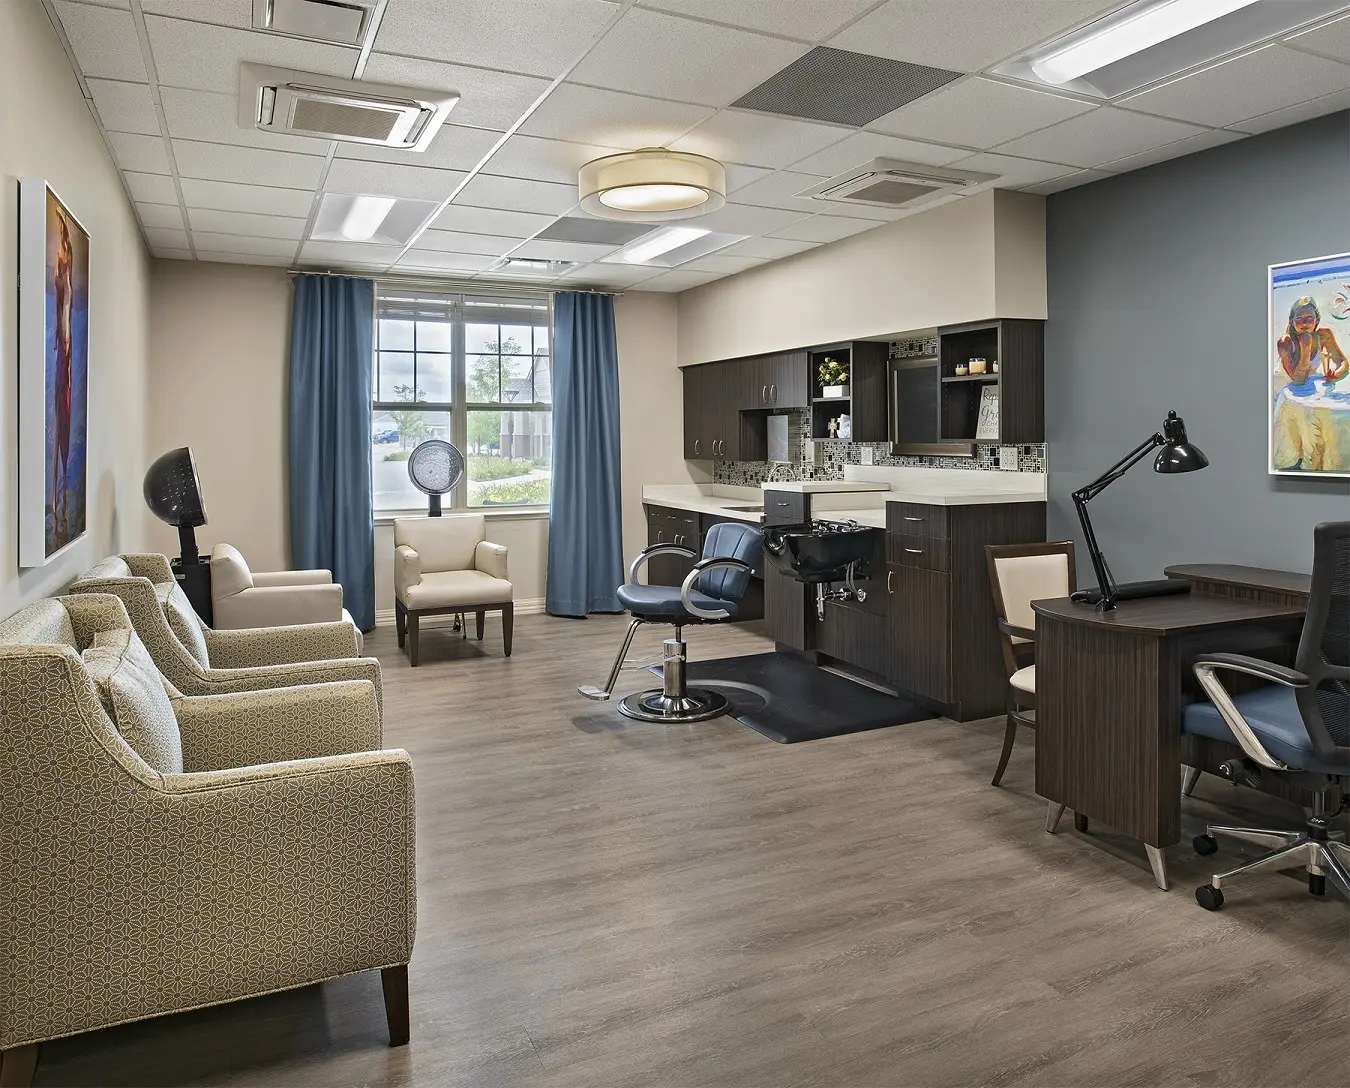 Salon at American House Freedom Place Roseville, a memory care community in Roseville, Michigan